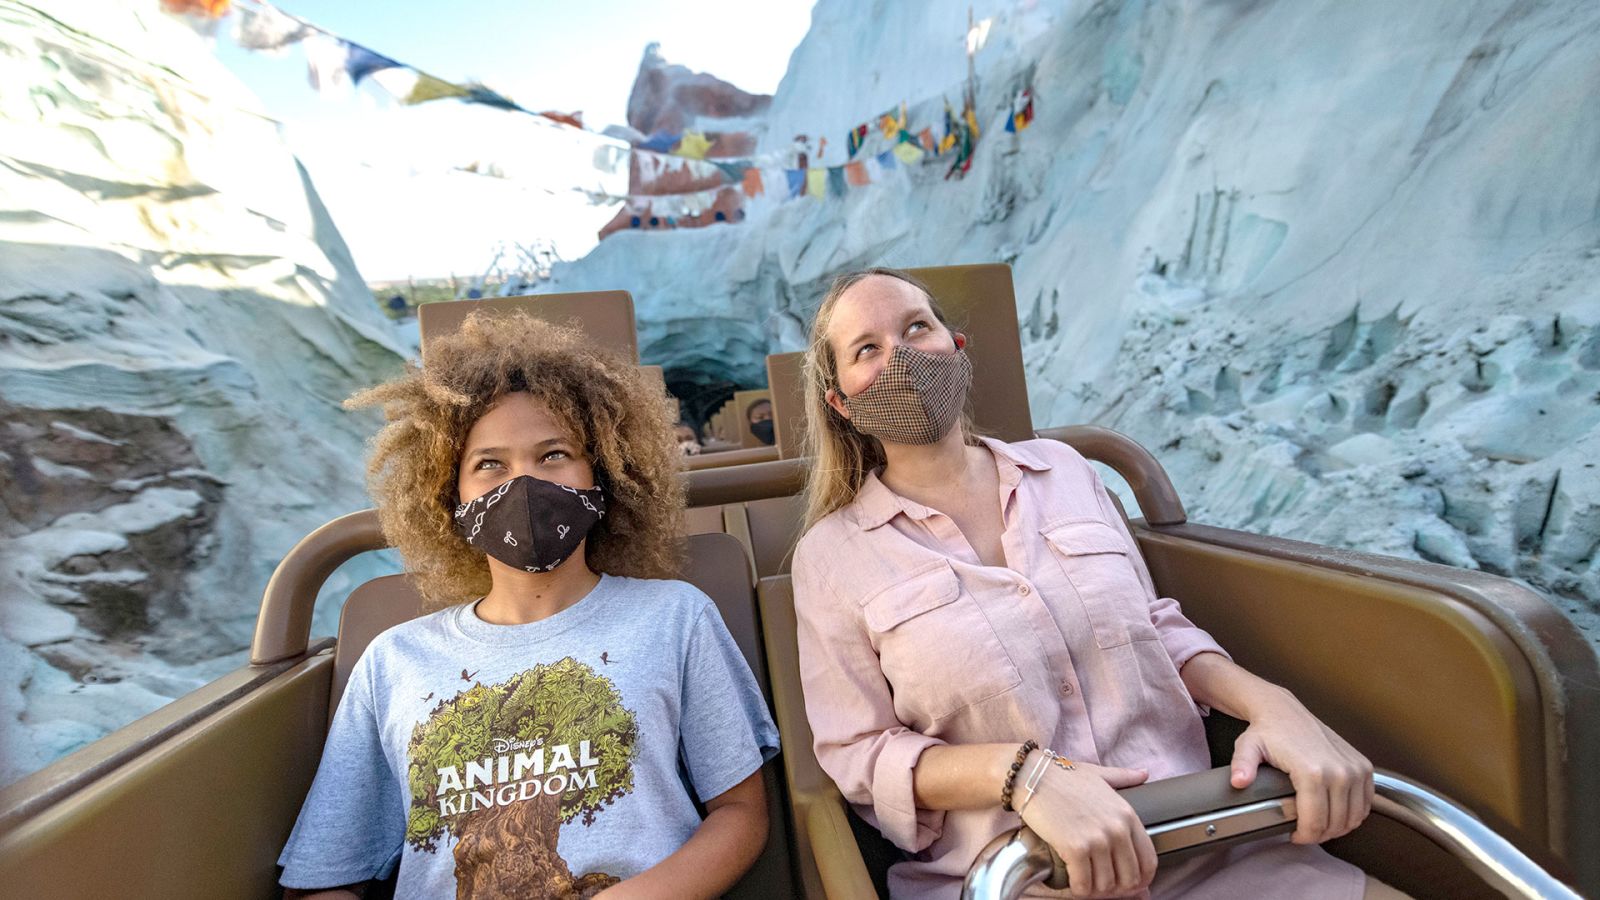 Friends in face masks riding Disney World's Expedition Everest roller coaster.